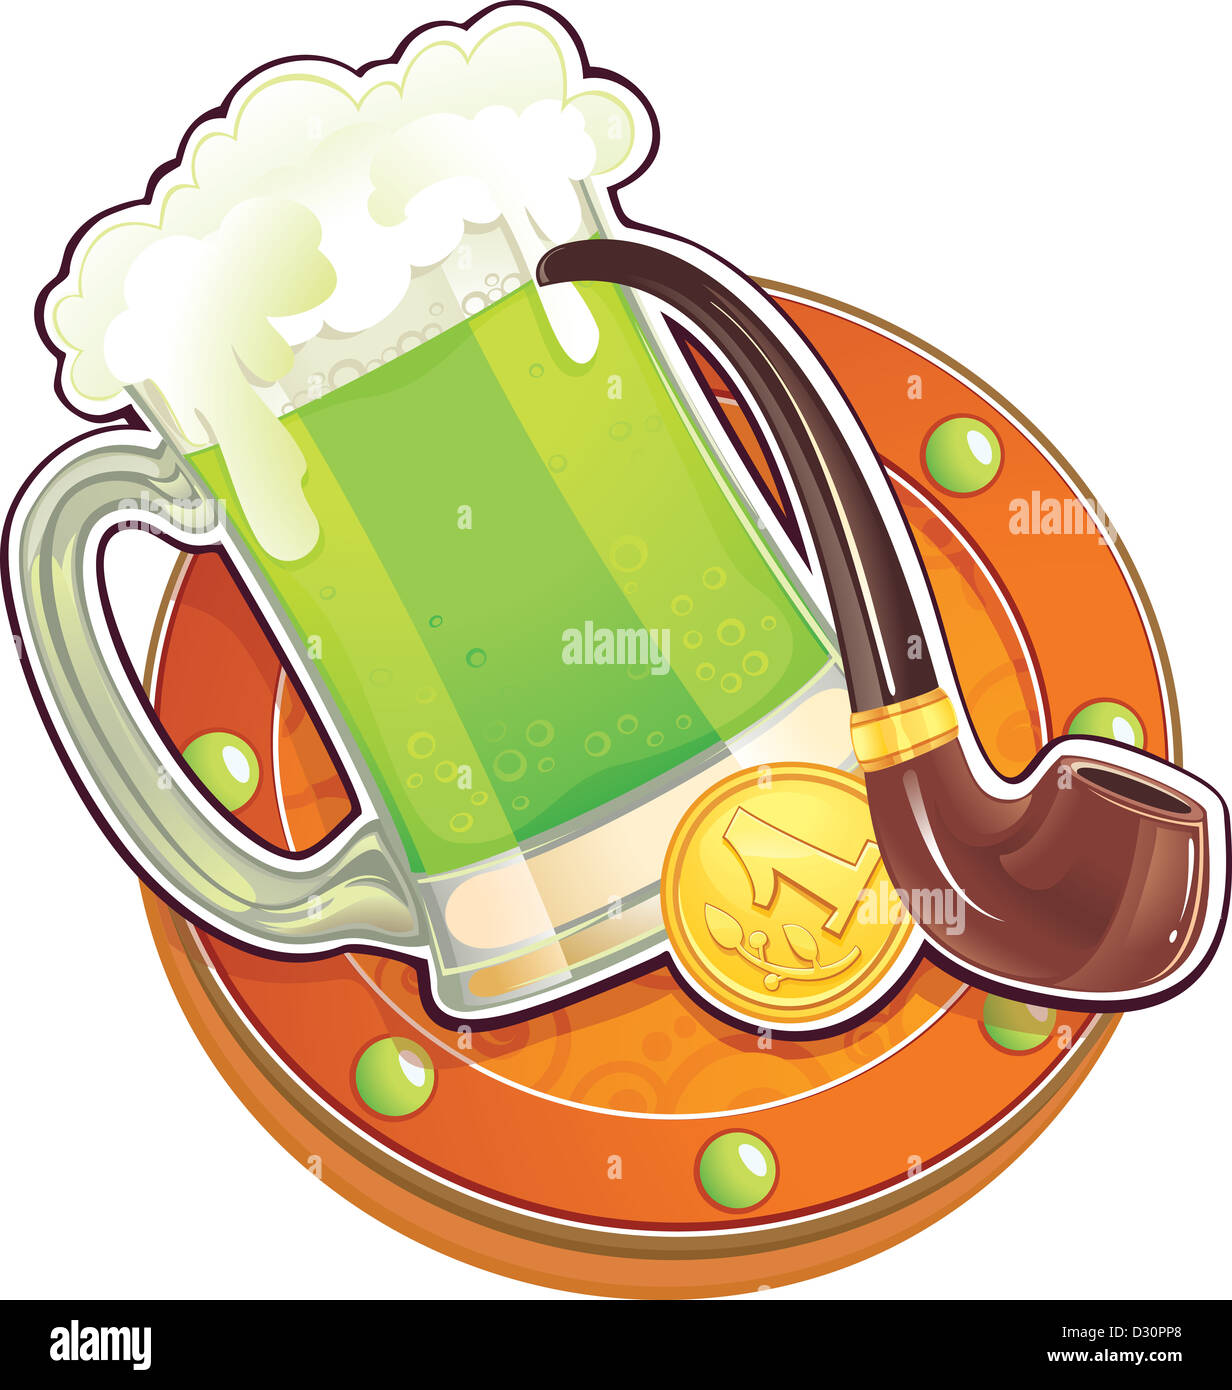 The Green Beer for St.Patrick's Day. Stock Photo